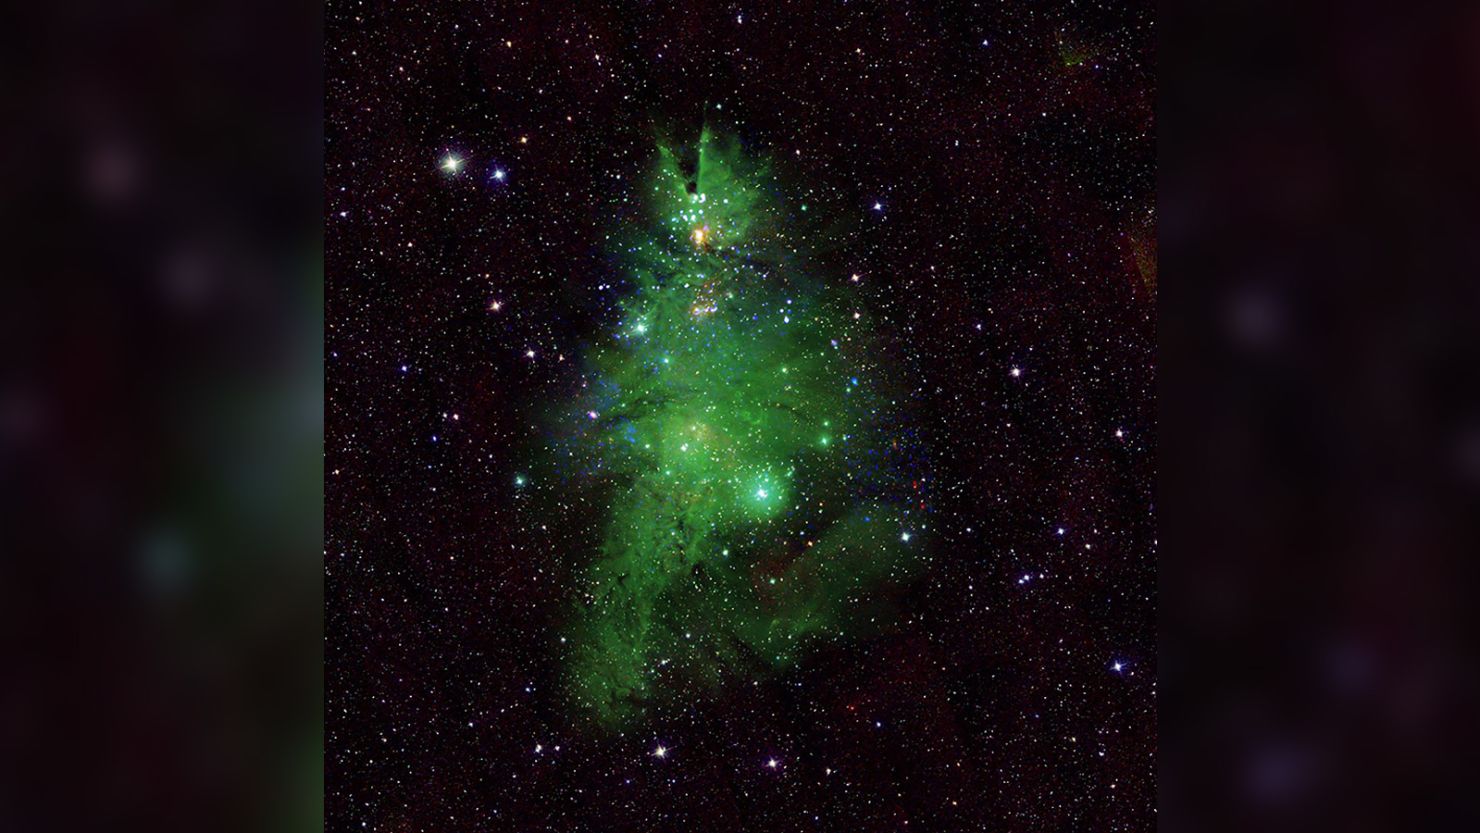 A new composite image showcases the “Christmas Tree Cluster” of young stars located about 2,500 <a href="https://chandra.harvard.edu/photo/cosmic_distance.html" target="_blank">light-years</a> away from Earth.